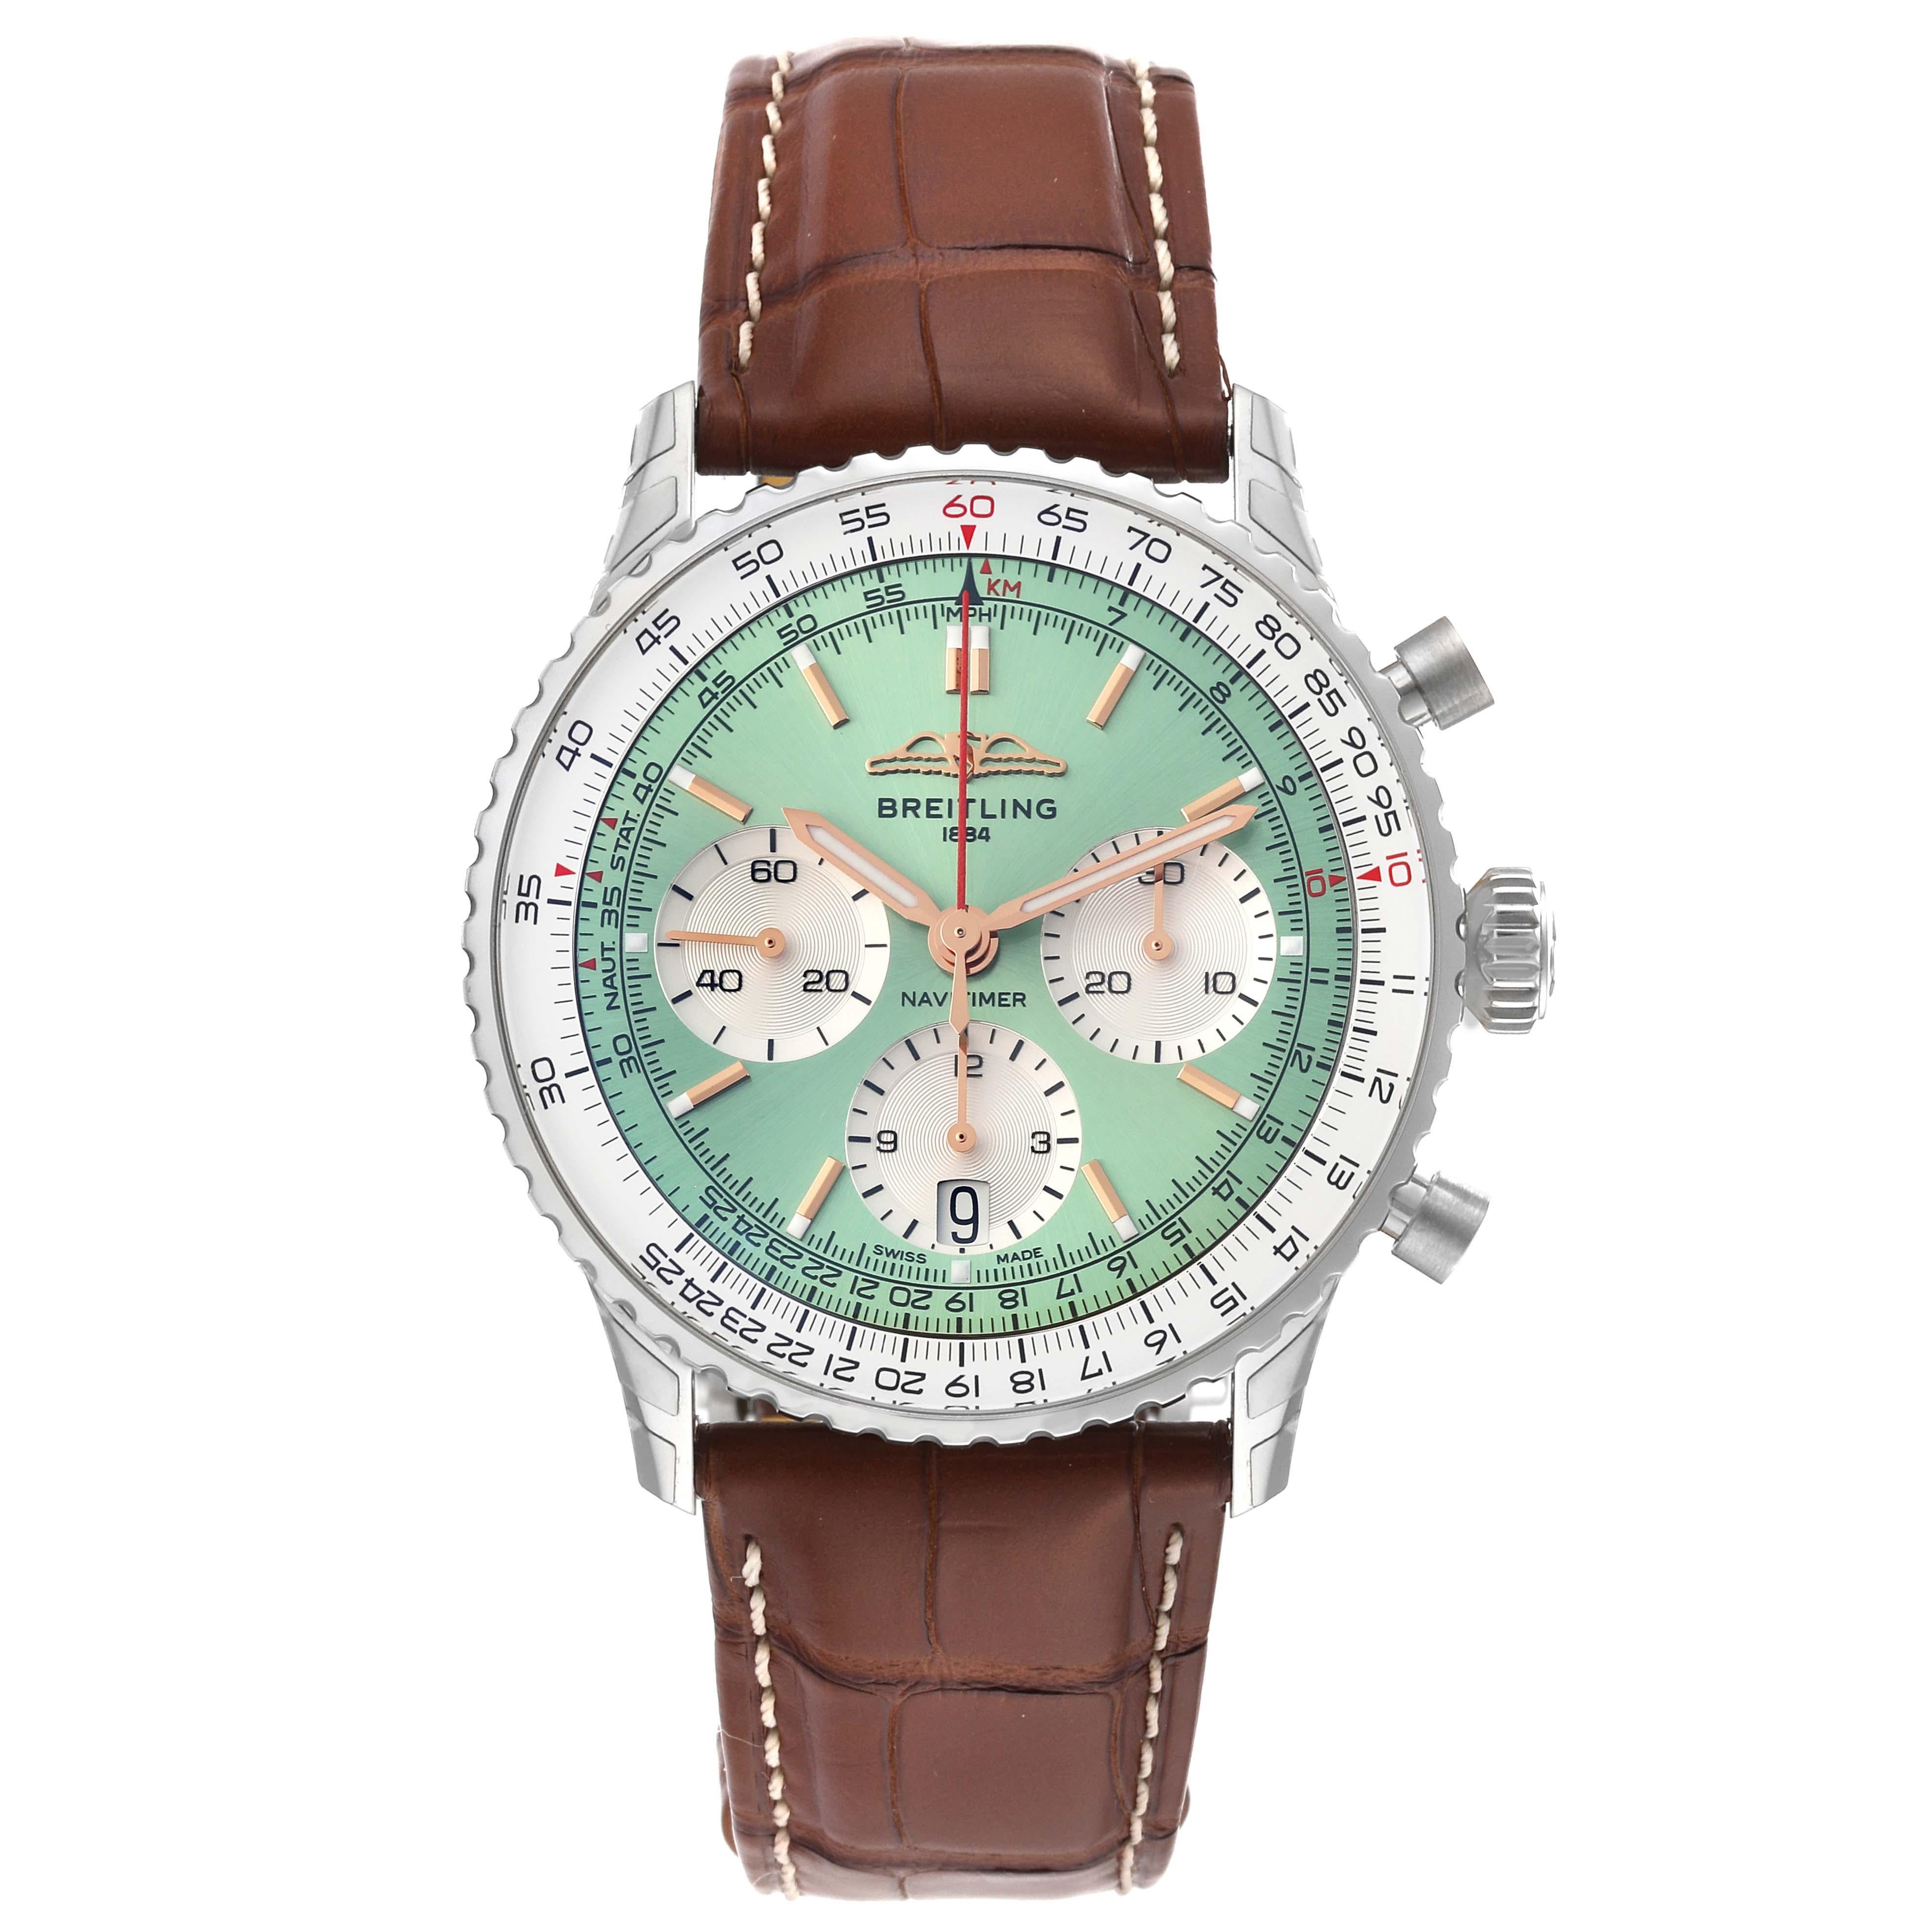 Breitling Navitimer B01 Chronograph 41 Green Dial Steel Mens Watch AB0139 Unworn. Self-winding automatic officially certified chronometer movement. Chronograph function. Stainless steel case 41 mm in diameter. Case thickness 13.6 mm. Transparent